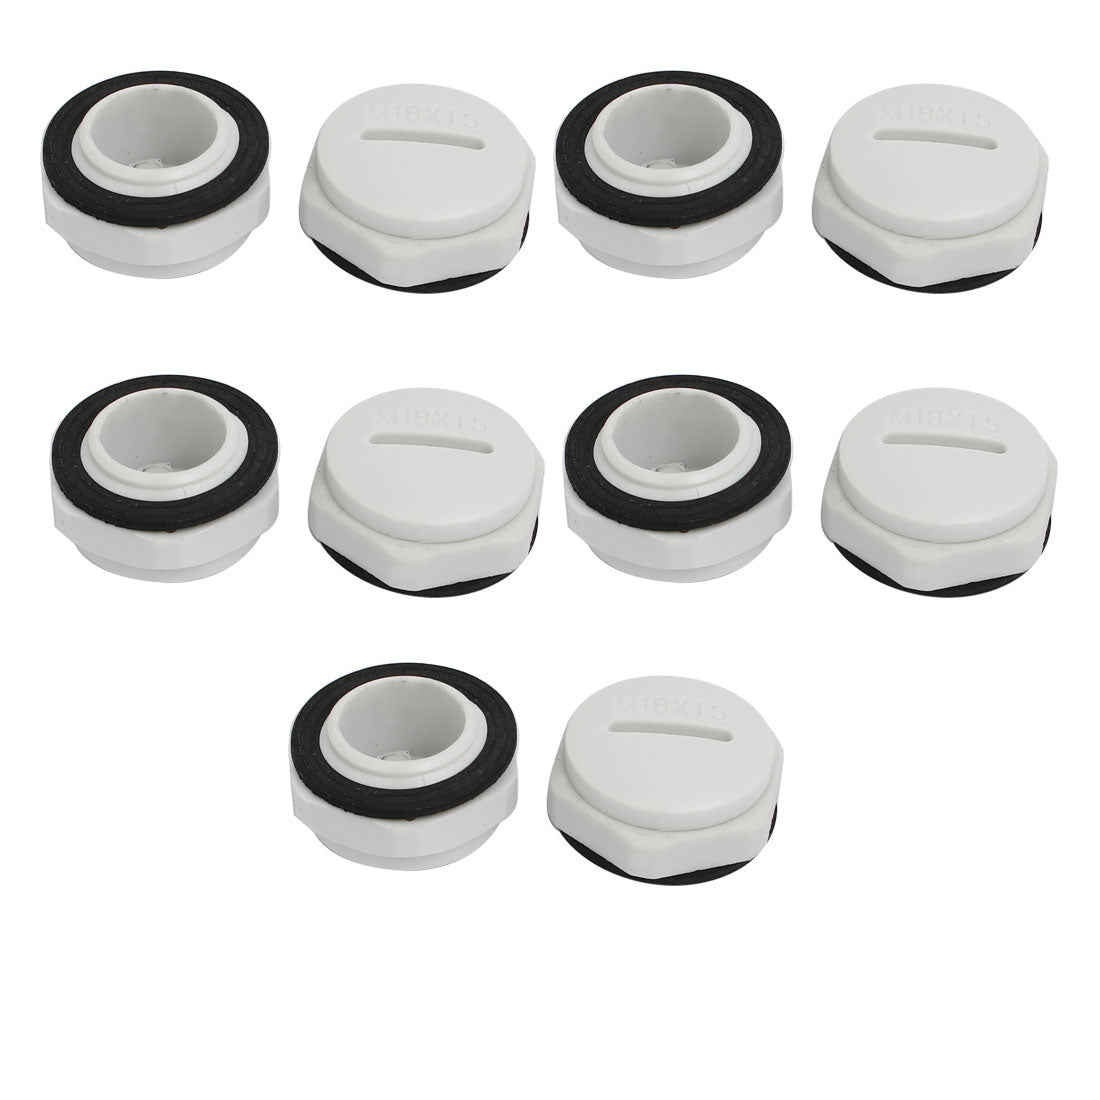 uxcell Uxcell M18 Nylon Male Threaded Cable Gland Screw End Cap Cover Gray 10pcs